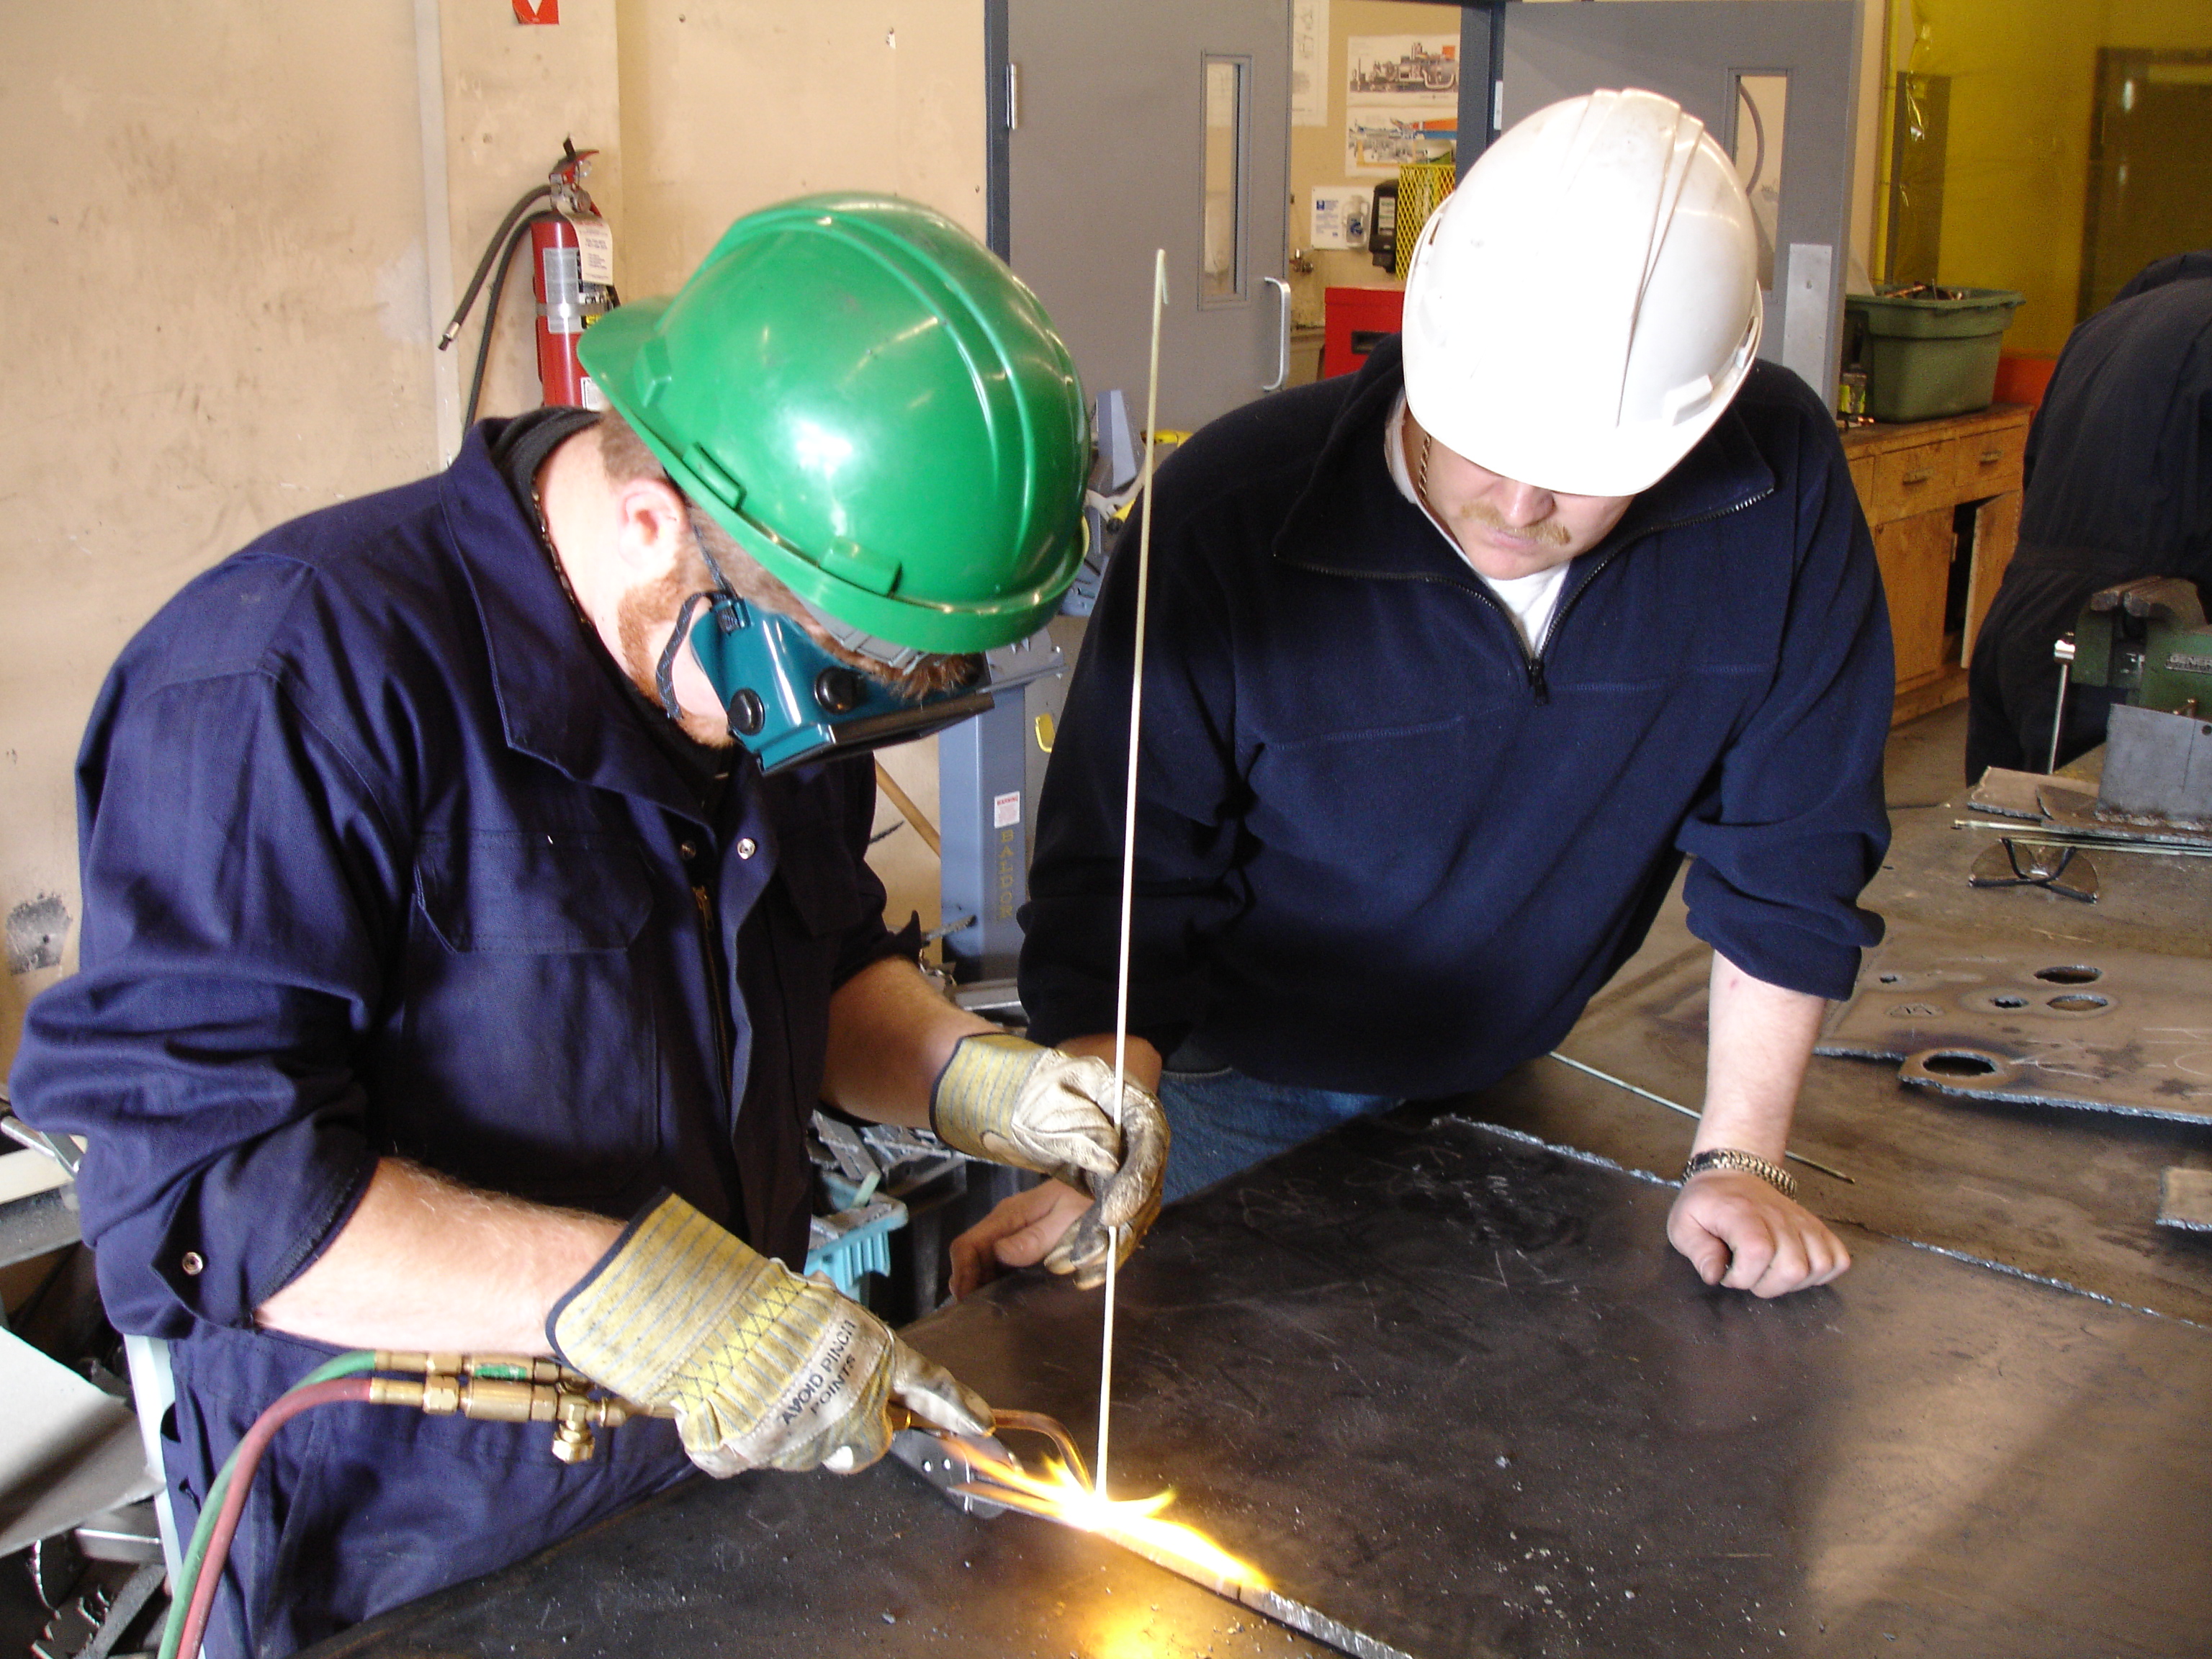 Employer and Apprentice image